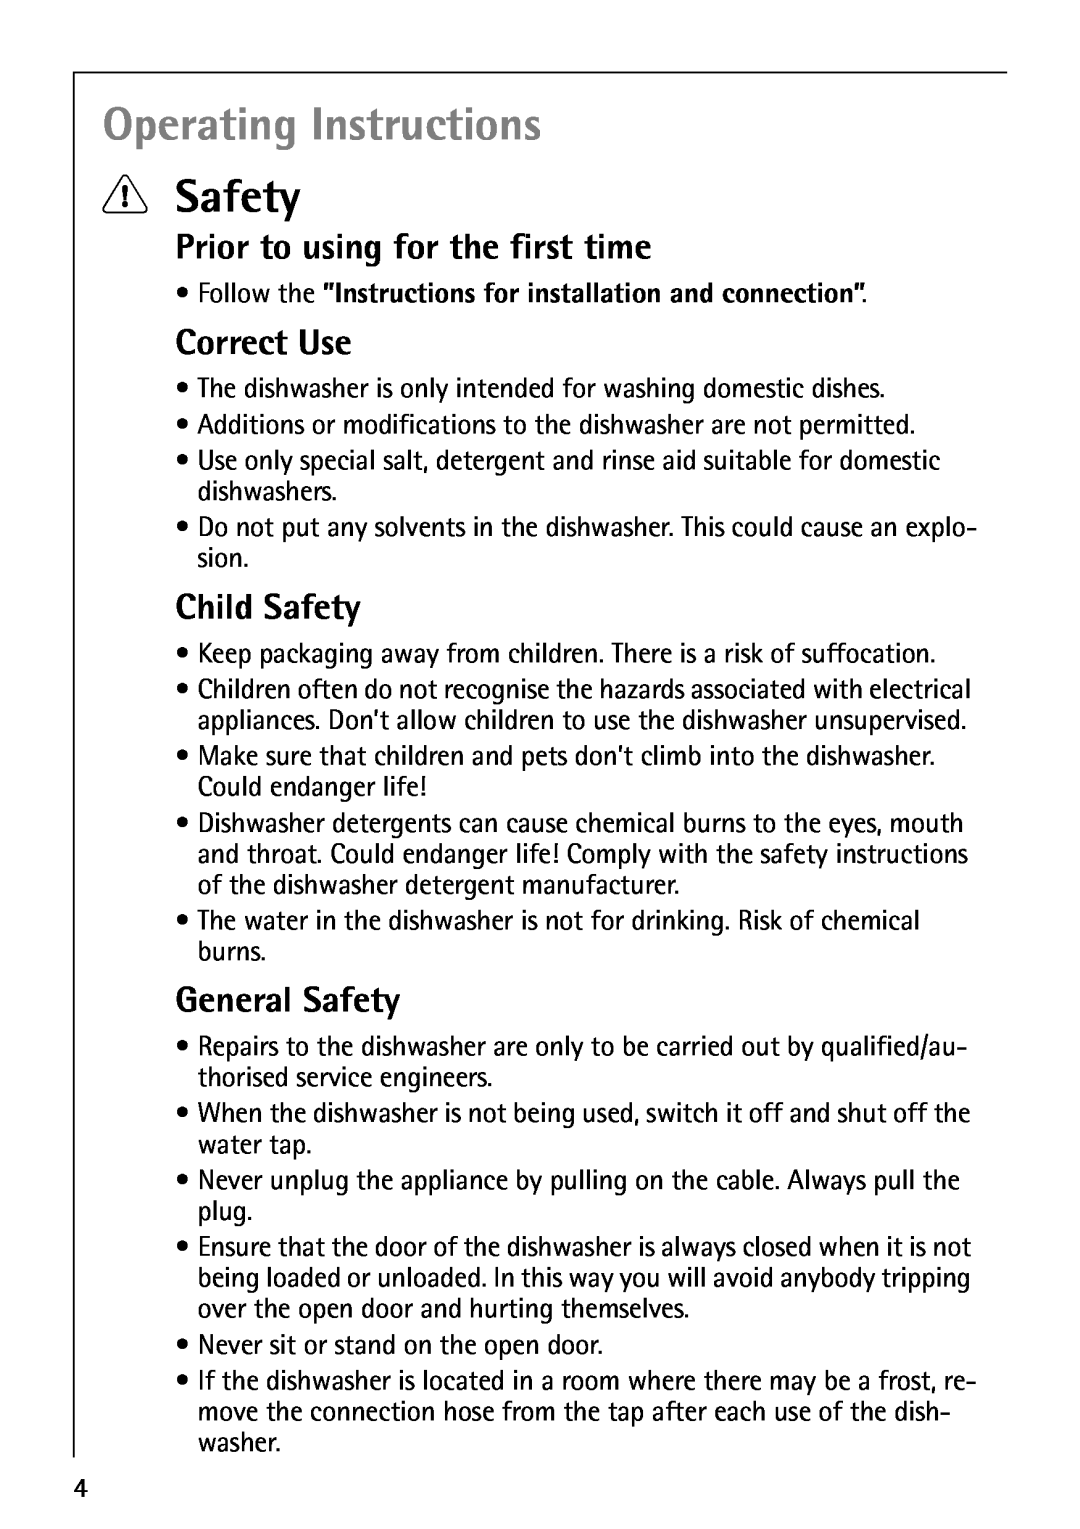 AEG 40660 Operating Instructions, 1Safety, Prior to using for the first time, Correct Use, Child Safety, General Safety 